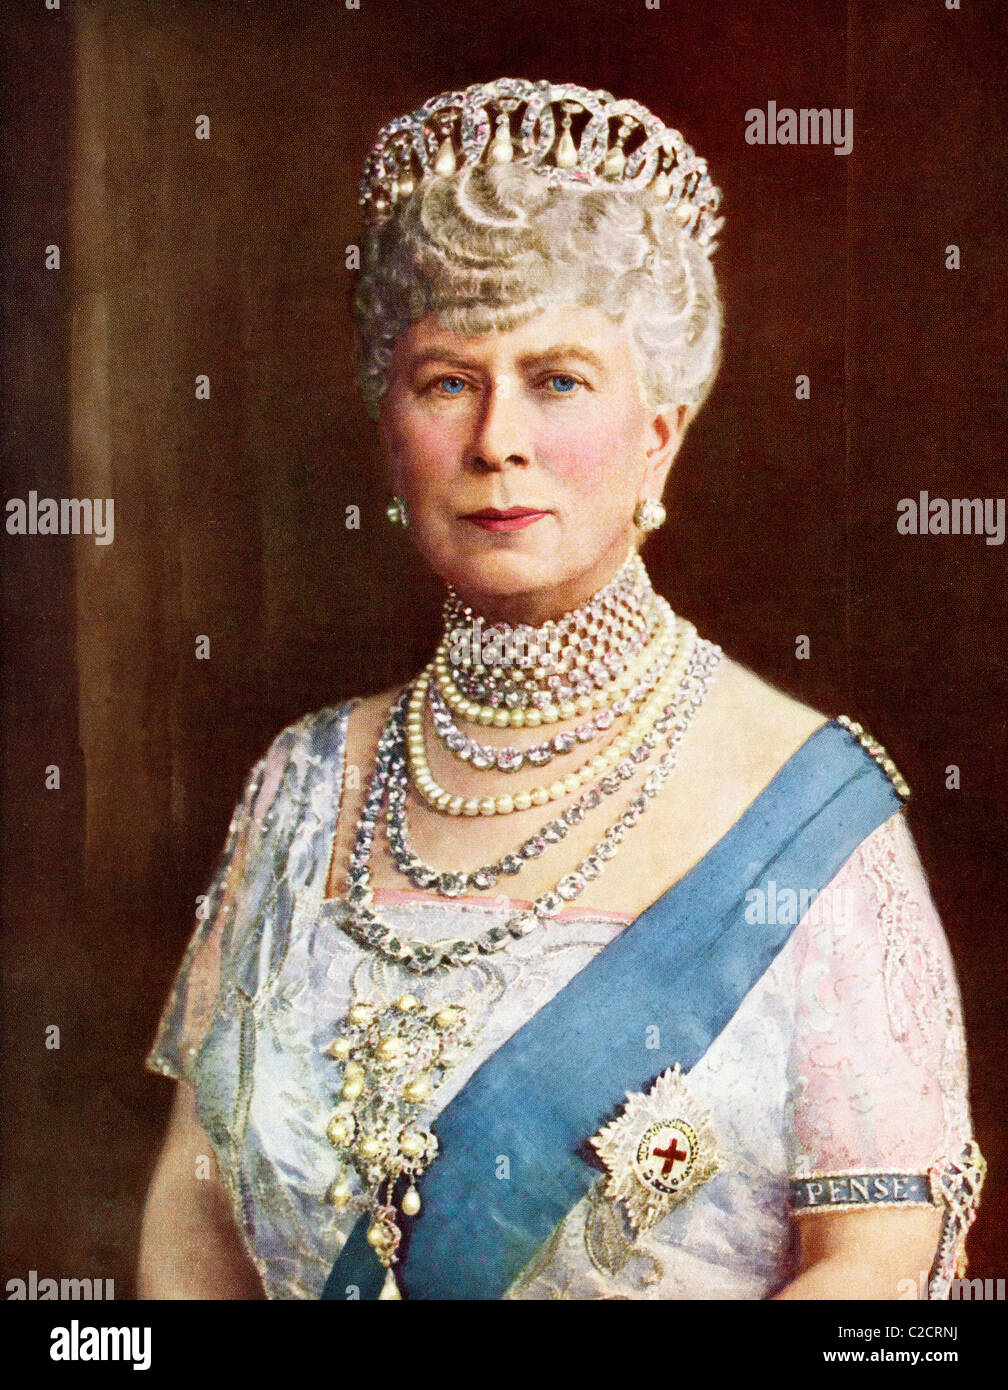 Queen Mary, consort of King George V, Mary of Teck, Victoria Mary Augusta Louise Olga Pauline Claudine Agnes, 1867 to 1953. Stock Photo